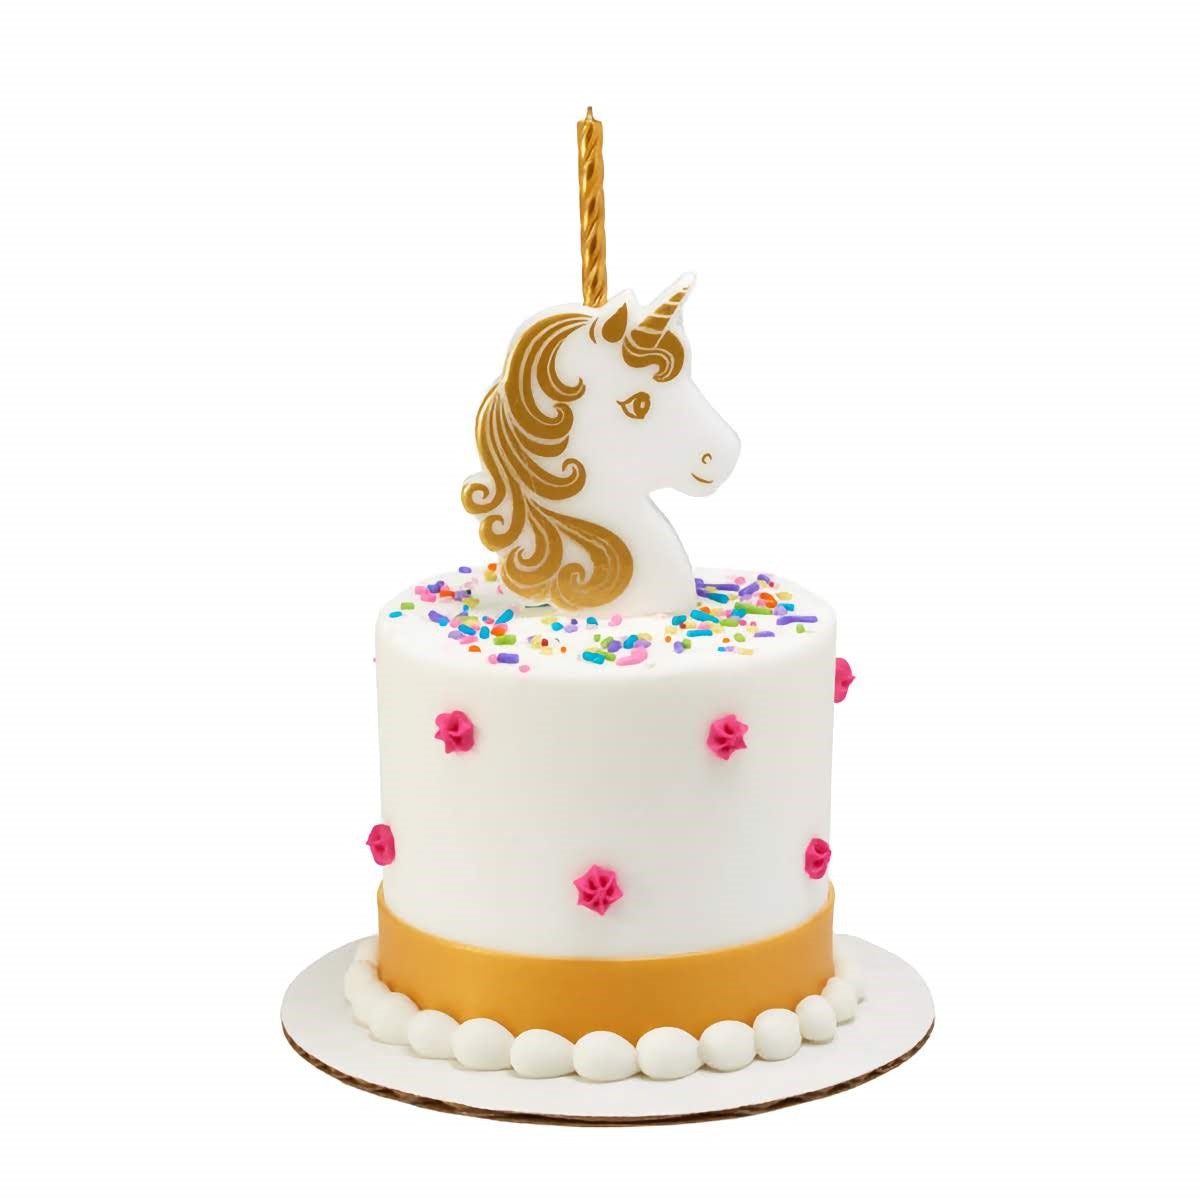 Elegant golden unicorn candle holder cake topper set, accompanied by a delicate unicorn horn candle, ideal for sophisticated birthday cakes from Lynn's Cake, Candy, and Chocolate Supplies.